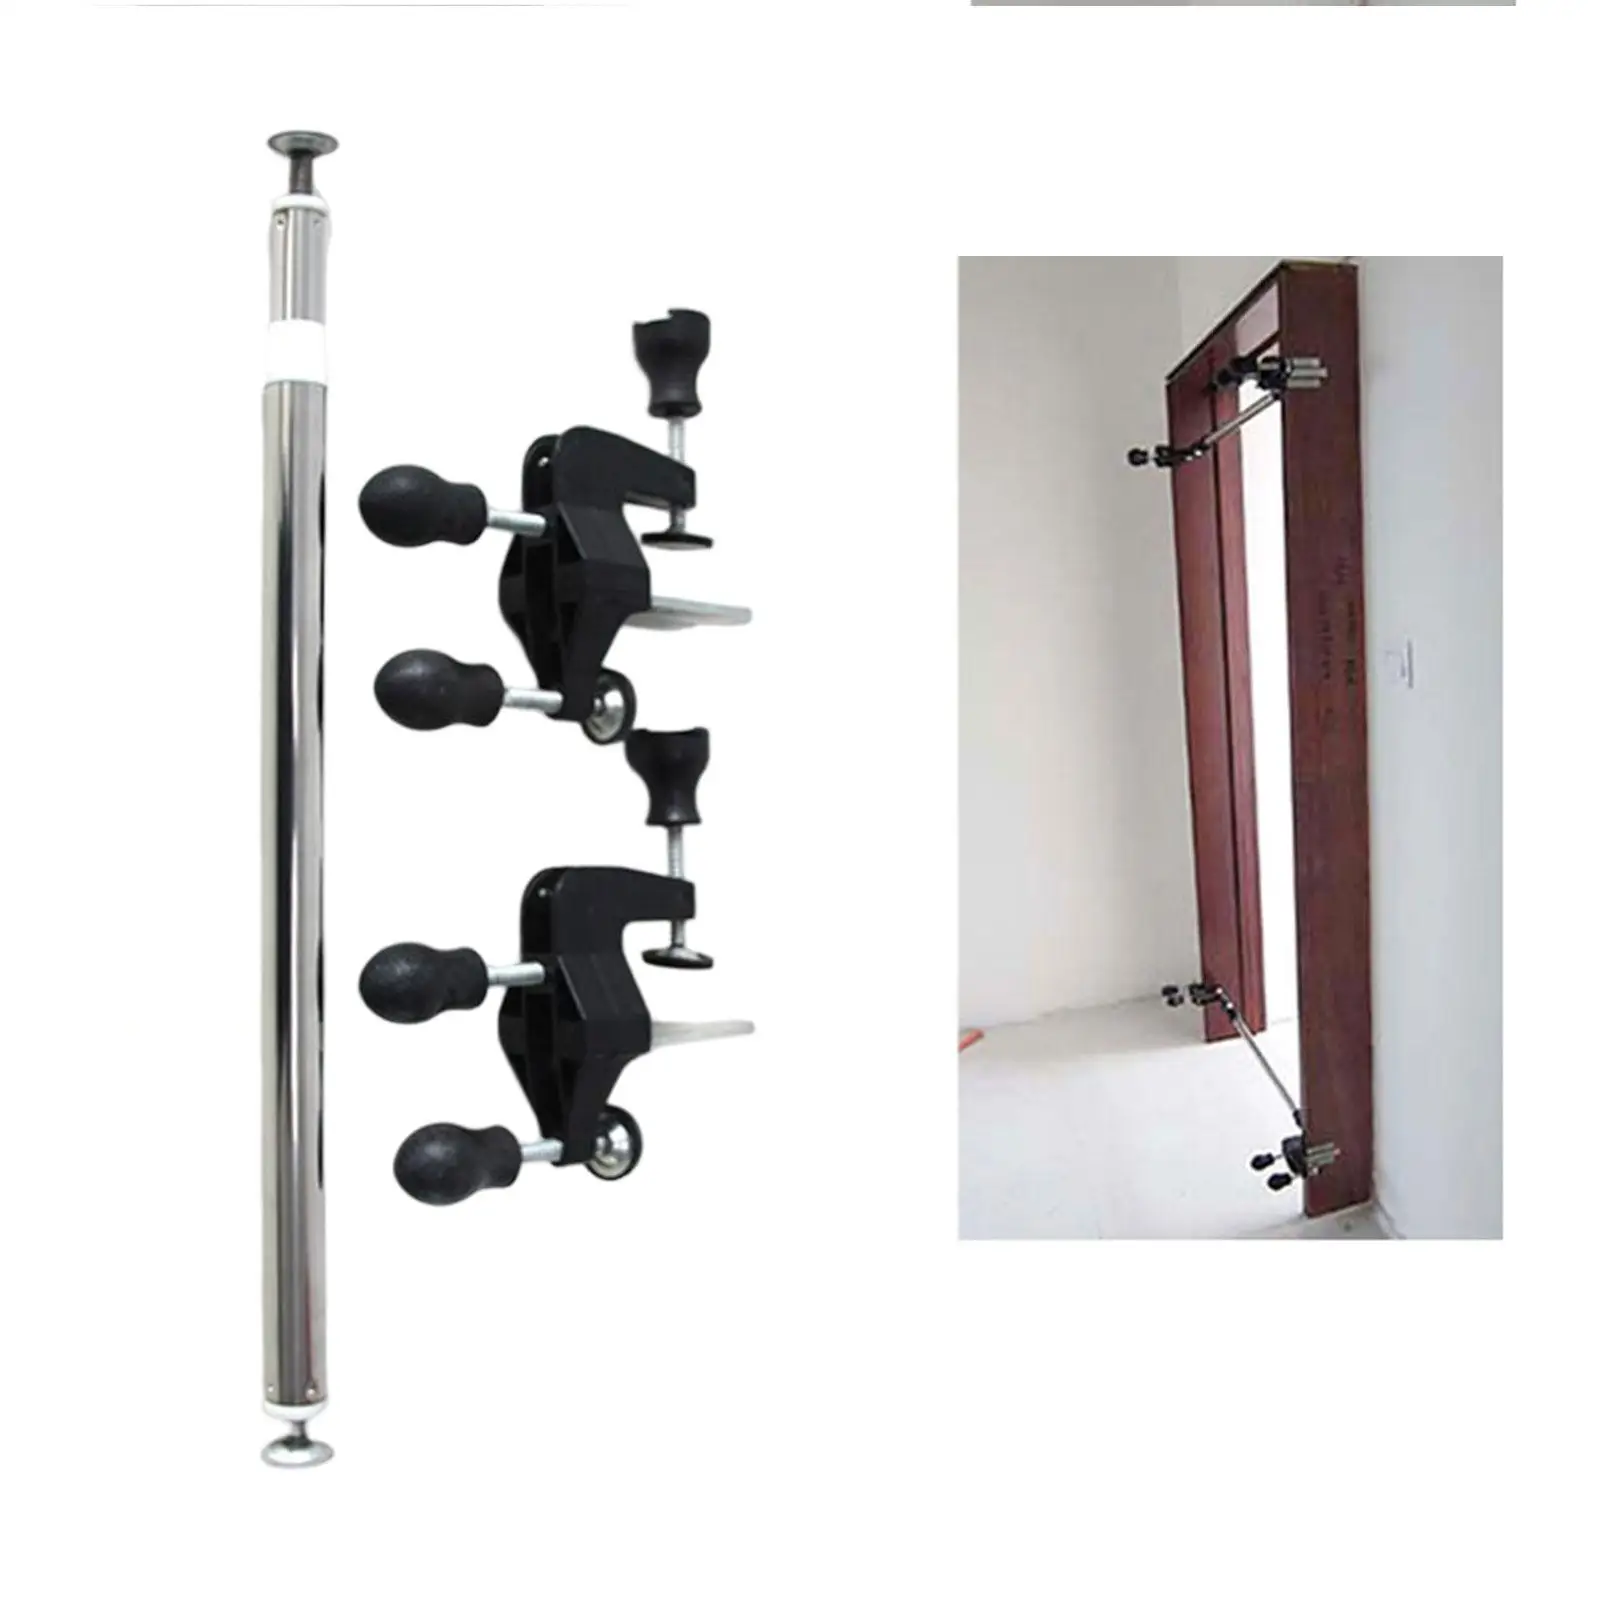 Professional Wooden Door Installer Set Clip Stainless Steel Assistant for Home Decor